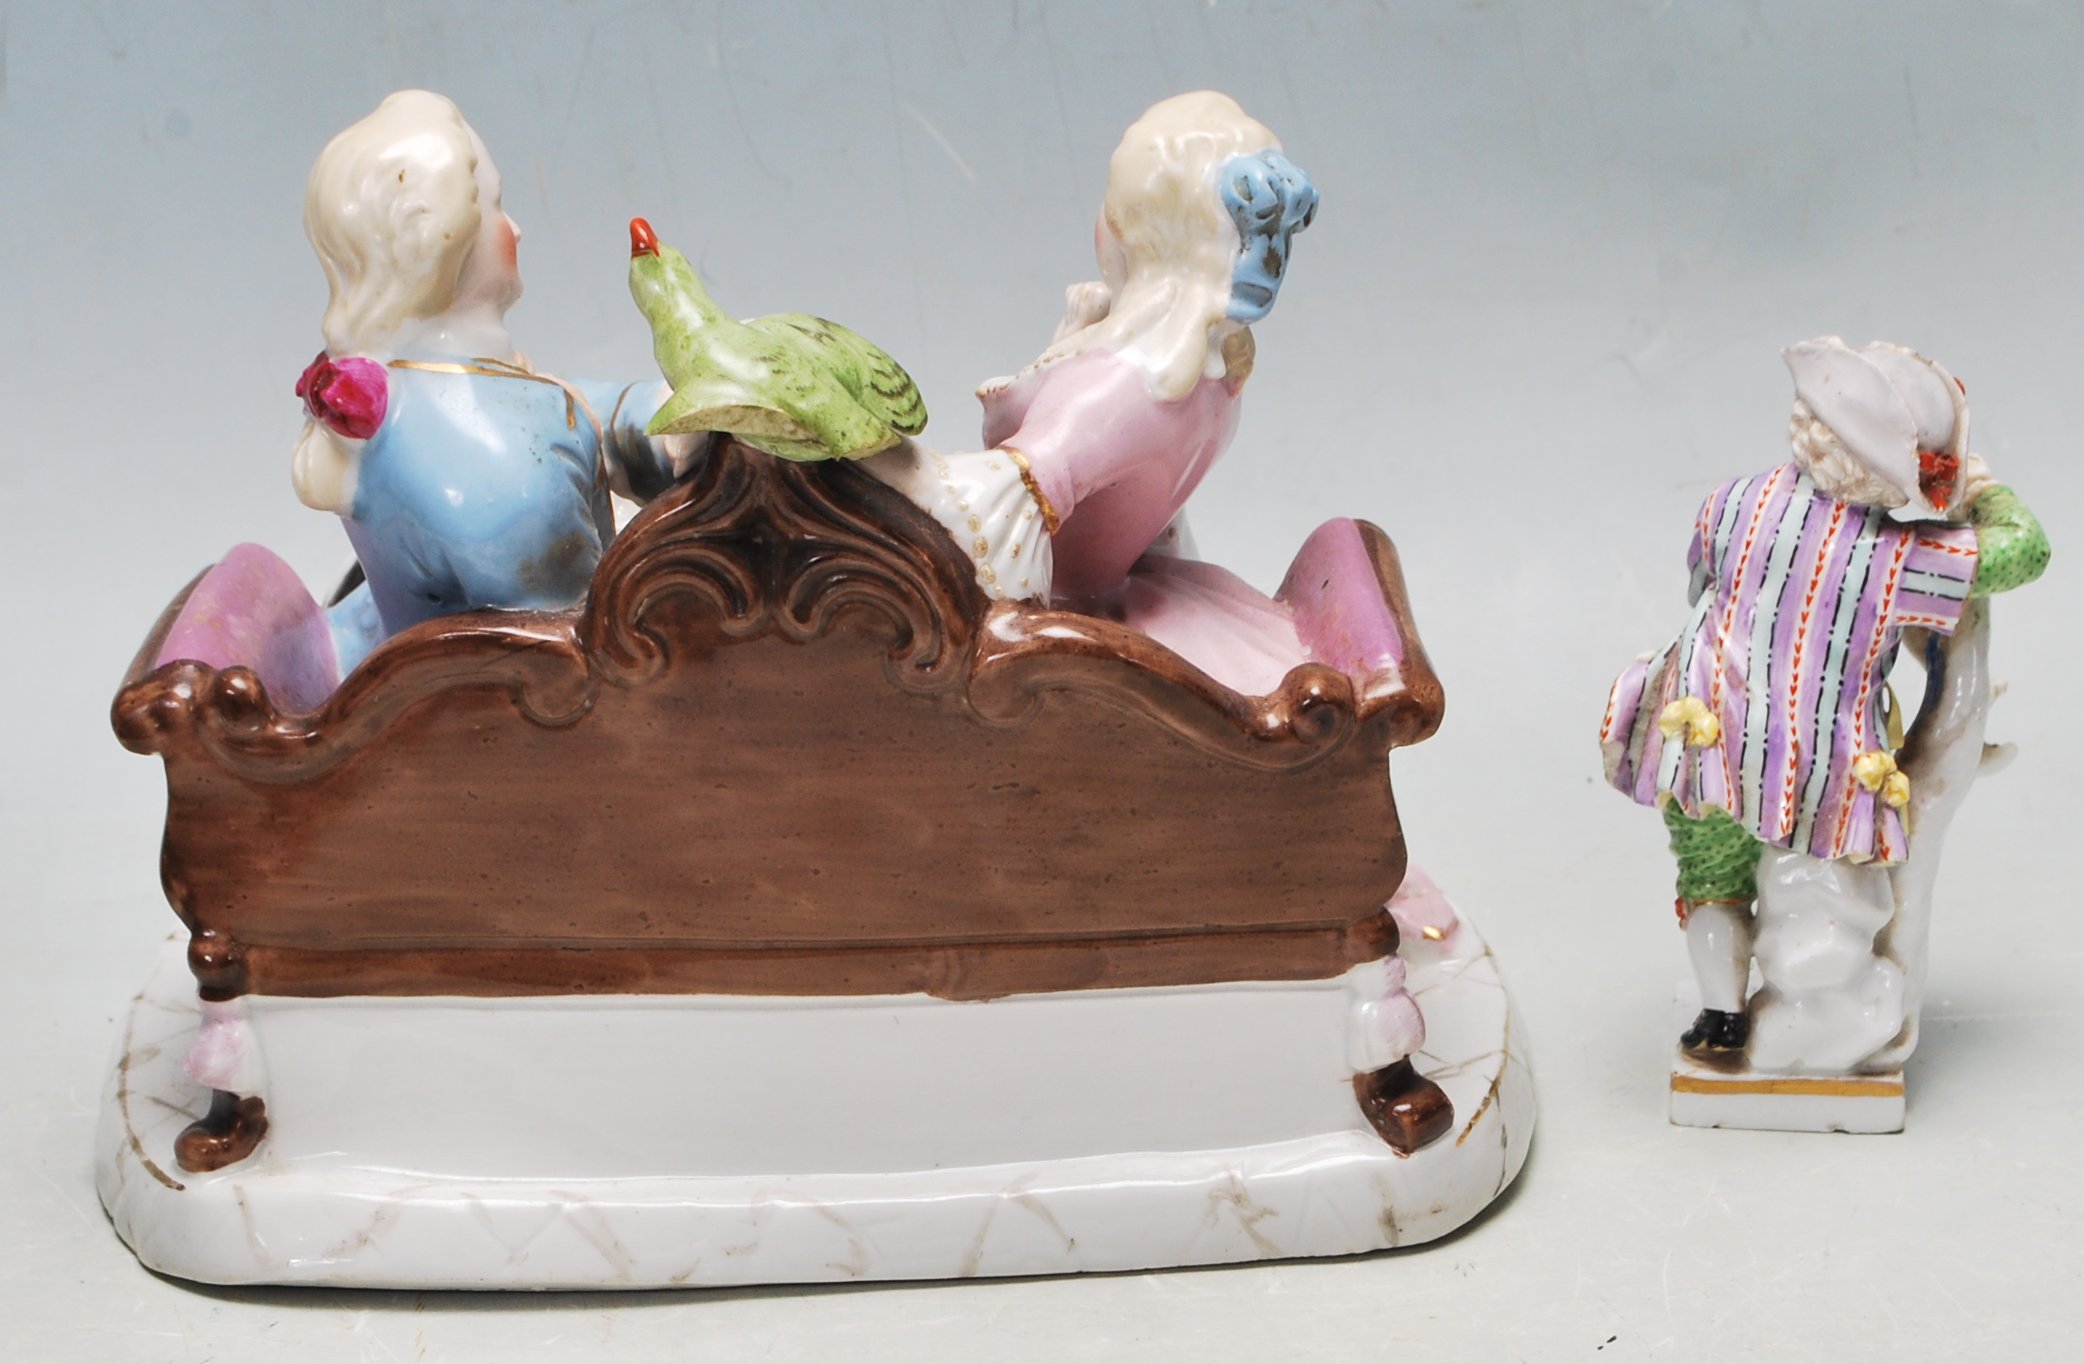 ANTIQUE 19TH CENTURY MEISSEN PORCELAIN FIGURINE TOGETHER WITH A GERMAN FIGURINE OF A COURTING COUPLE - Image 3 of 6